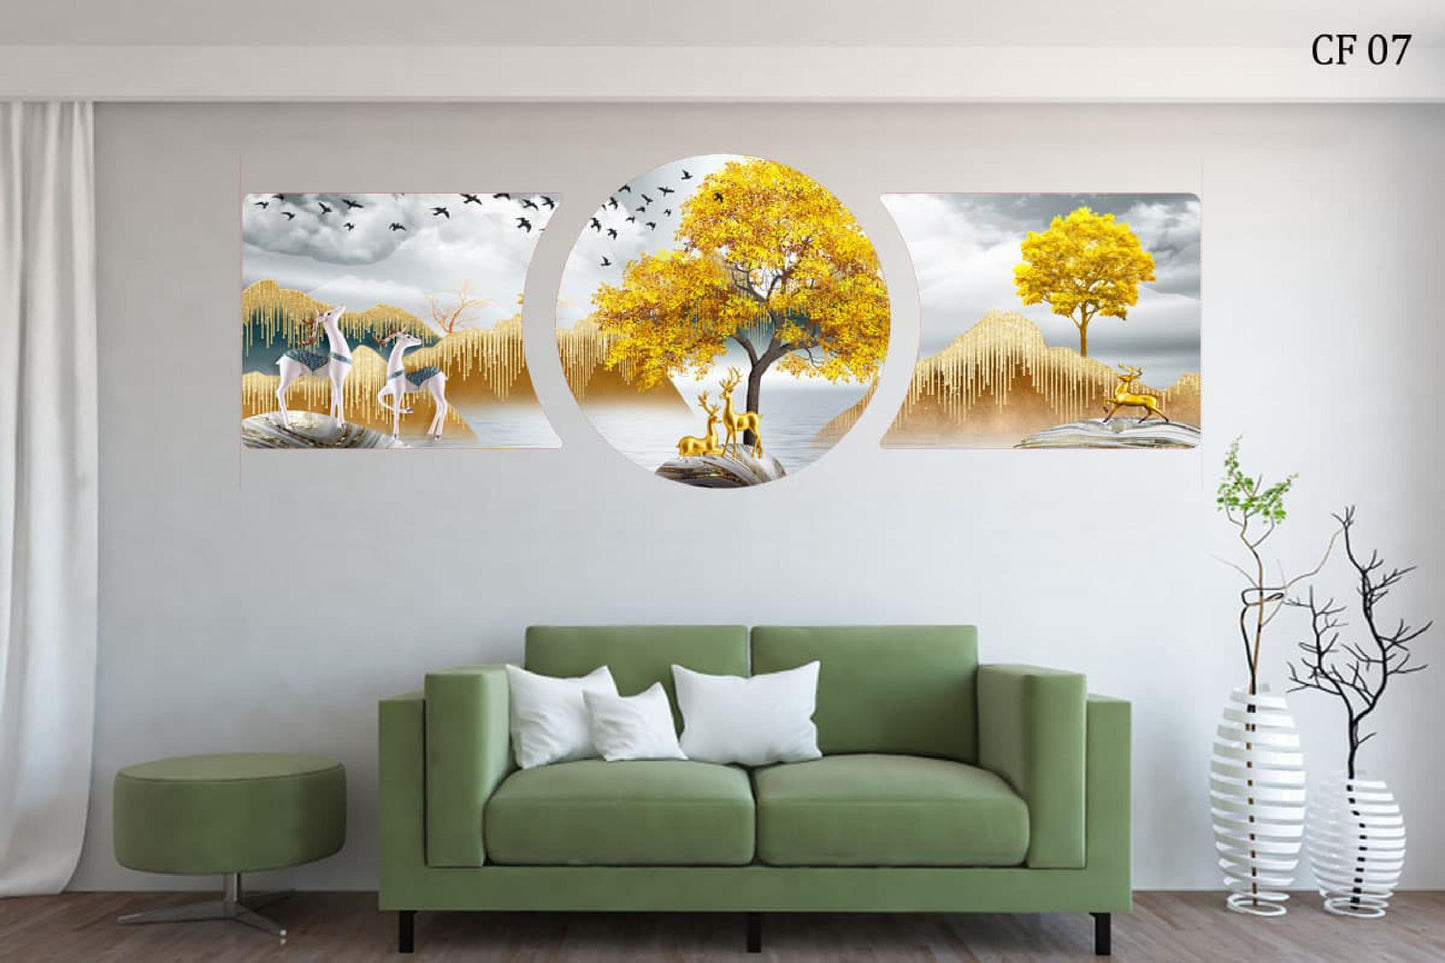 Resin Art Natural Wall Frame CF 07, Wall Decor For Living Room, For Home Decore , Office Decore and Gifting